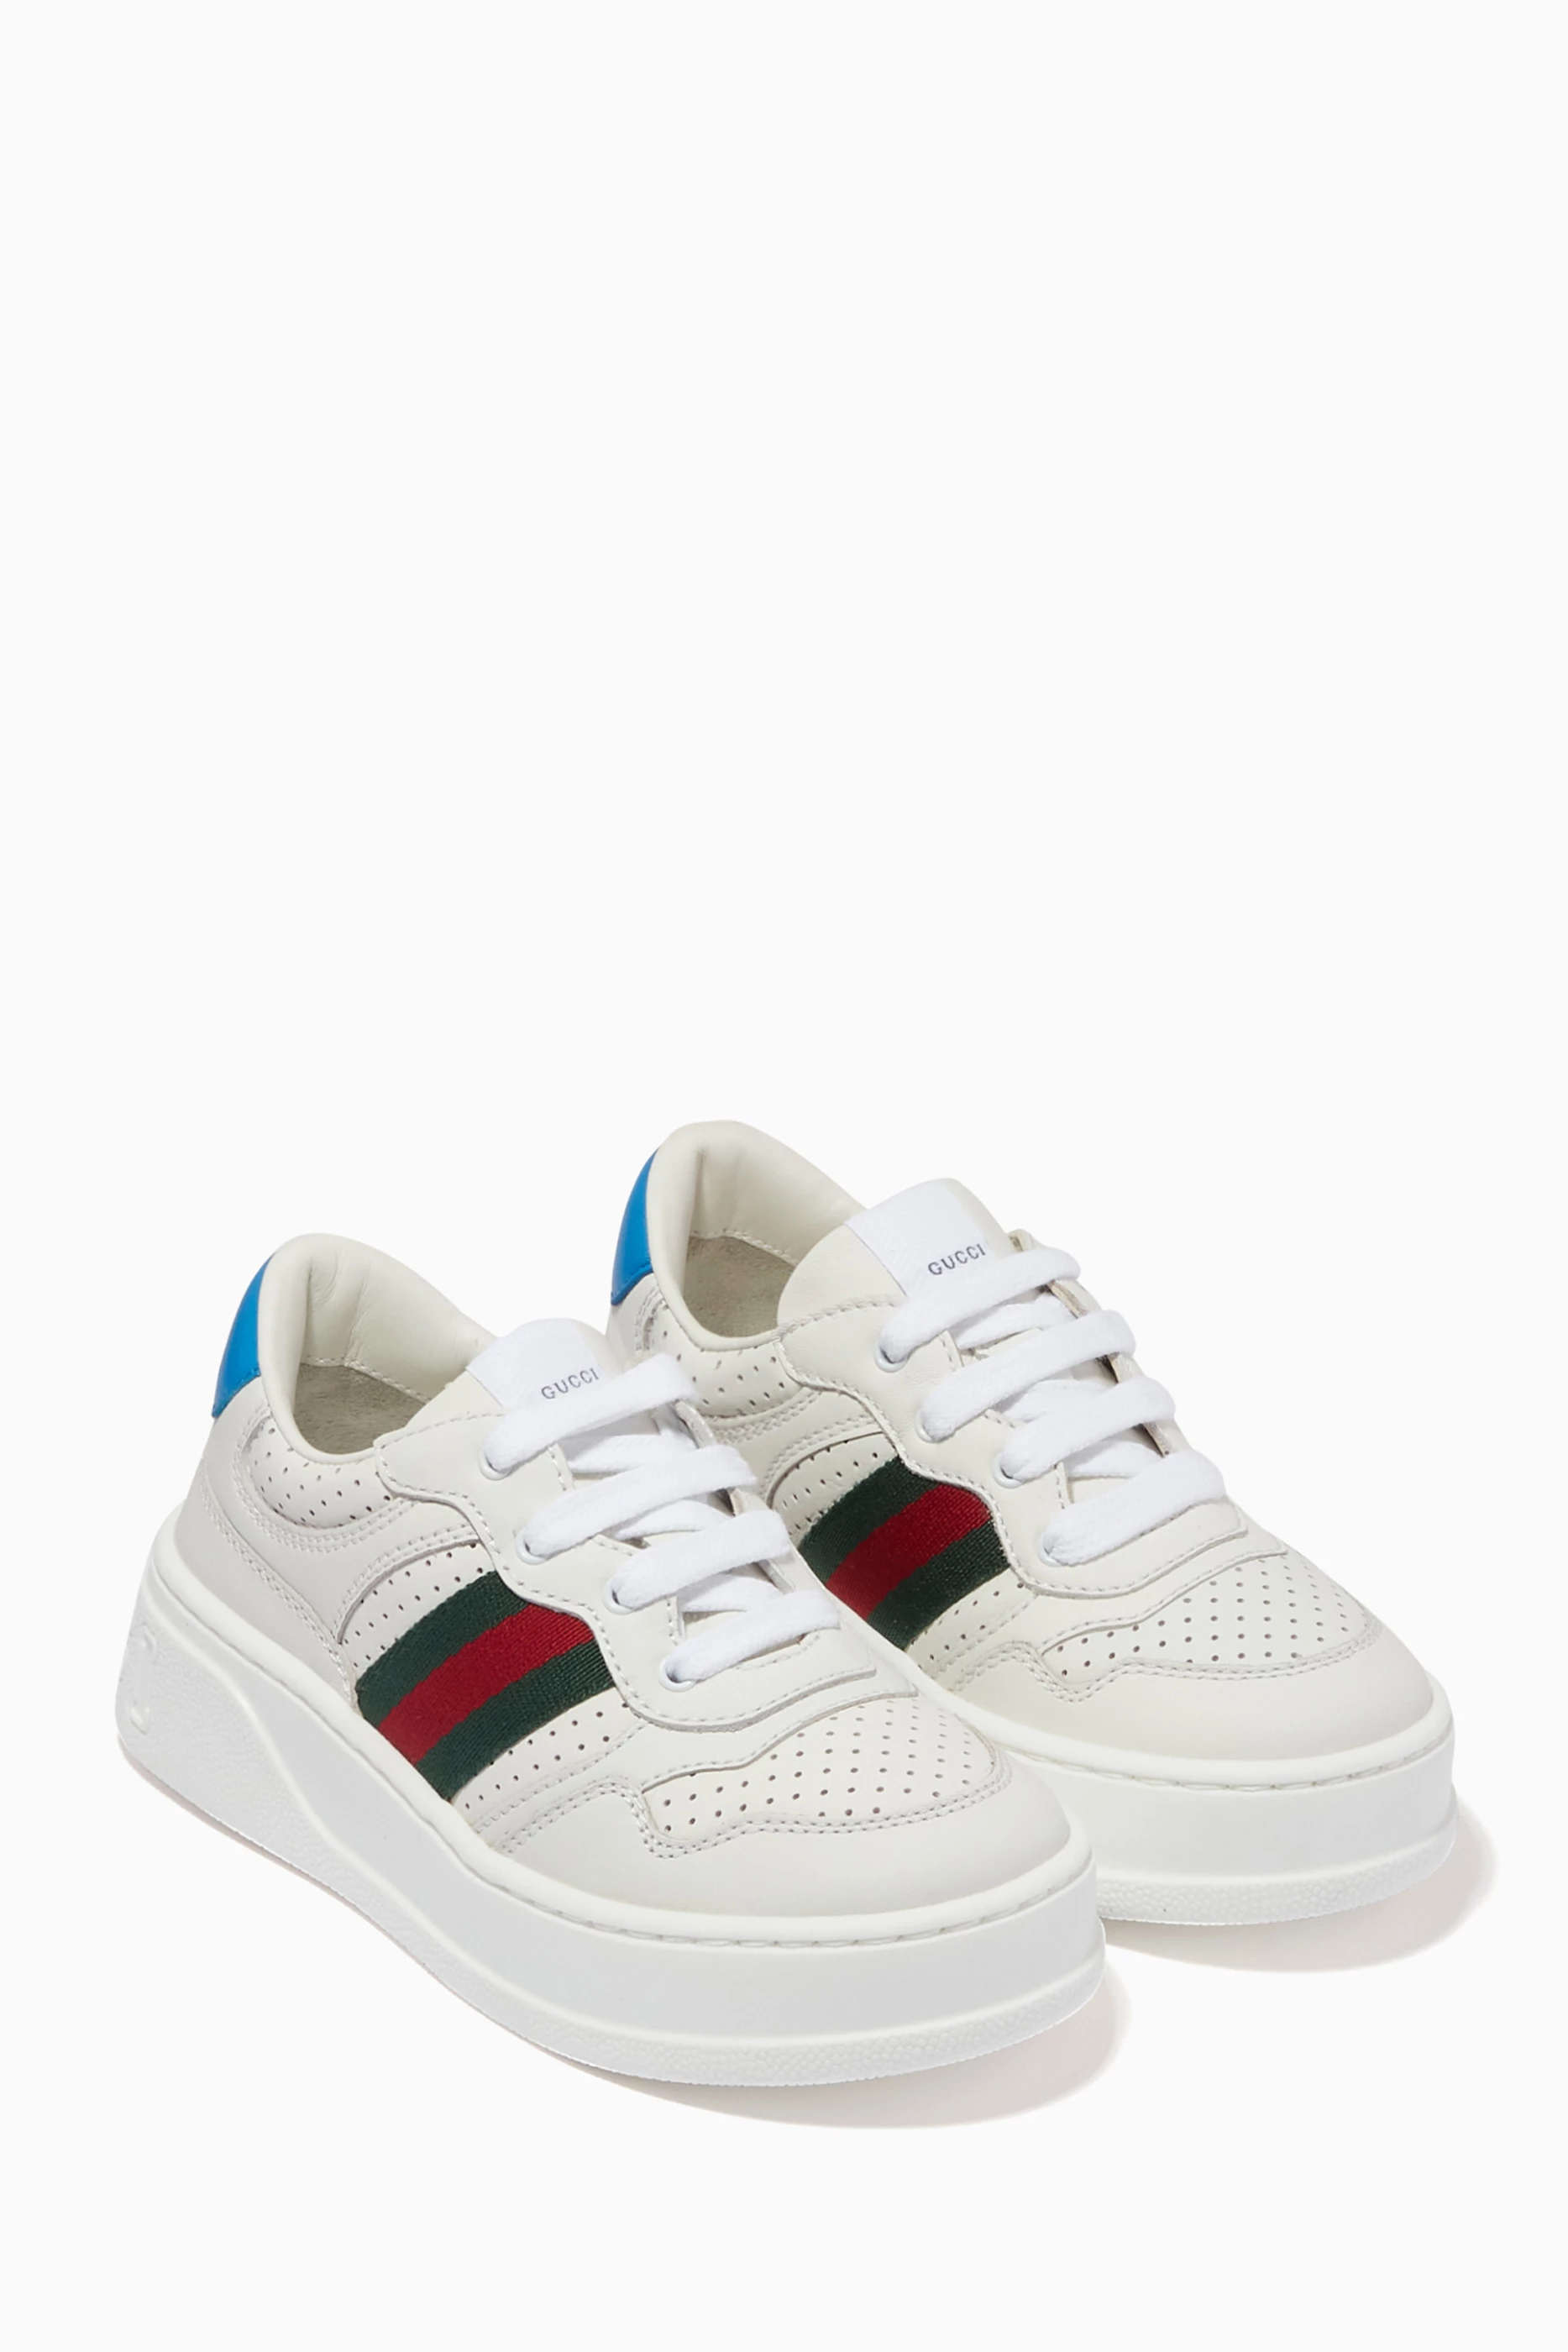 Shop Gucci White Chunky Web Sneakers in Leather for KIDS | Ounass Saudi  Arabia